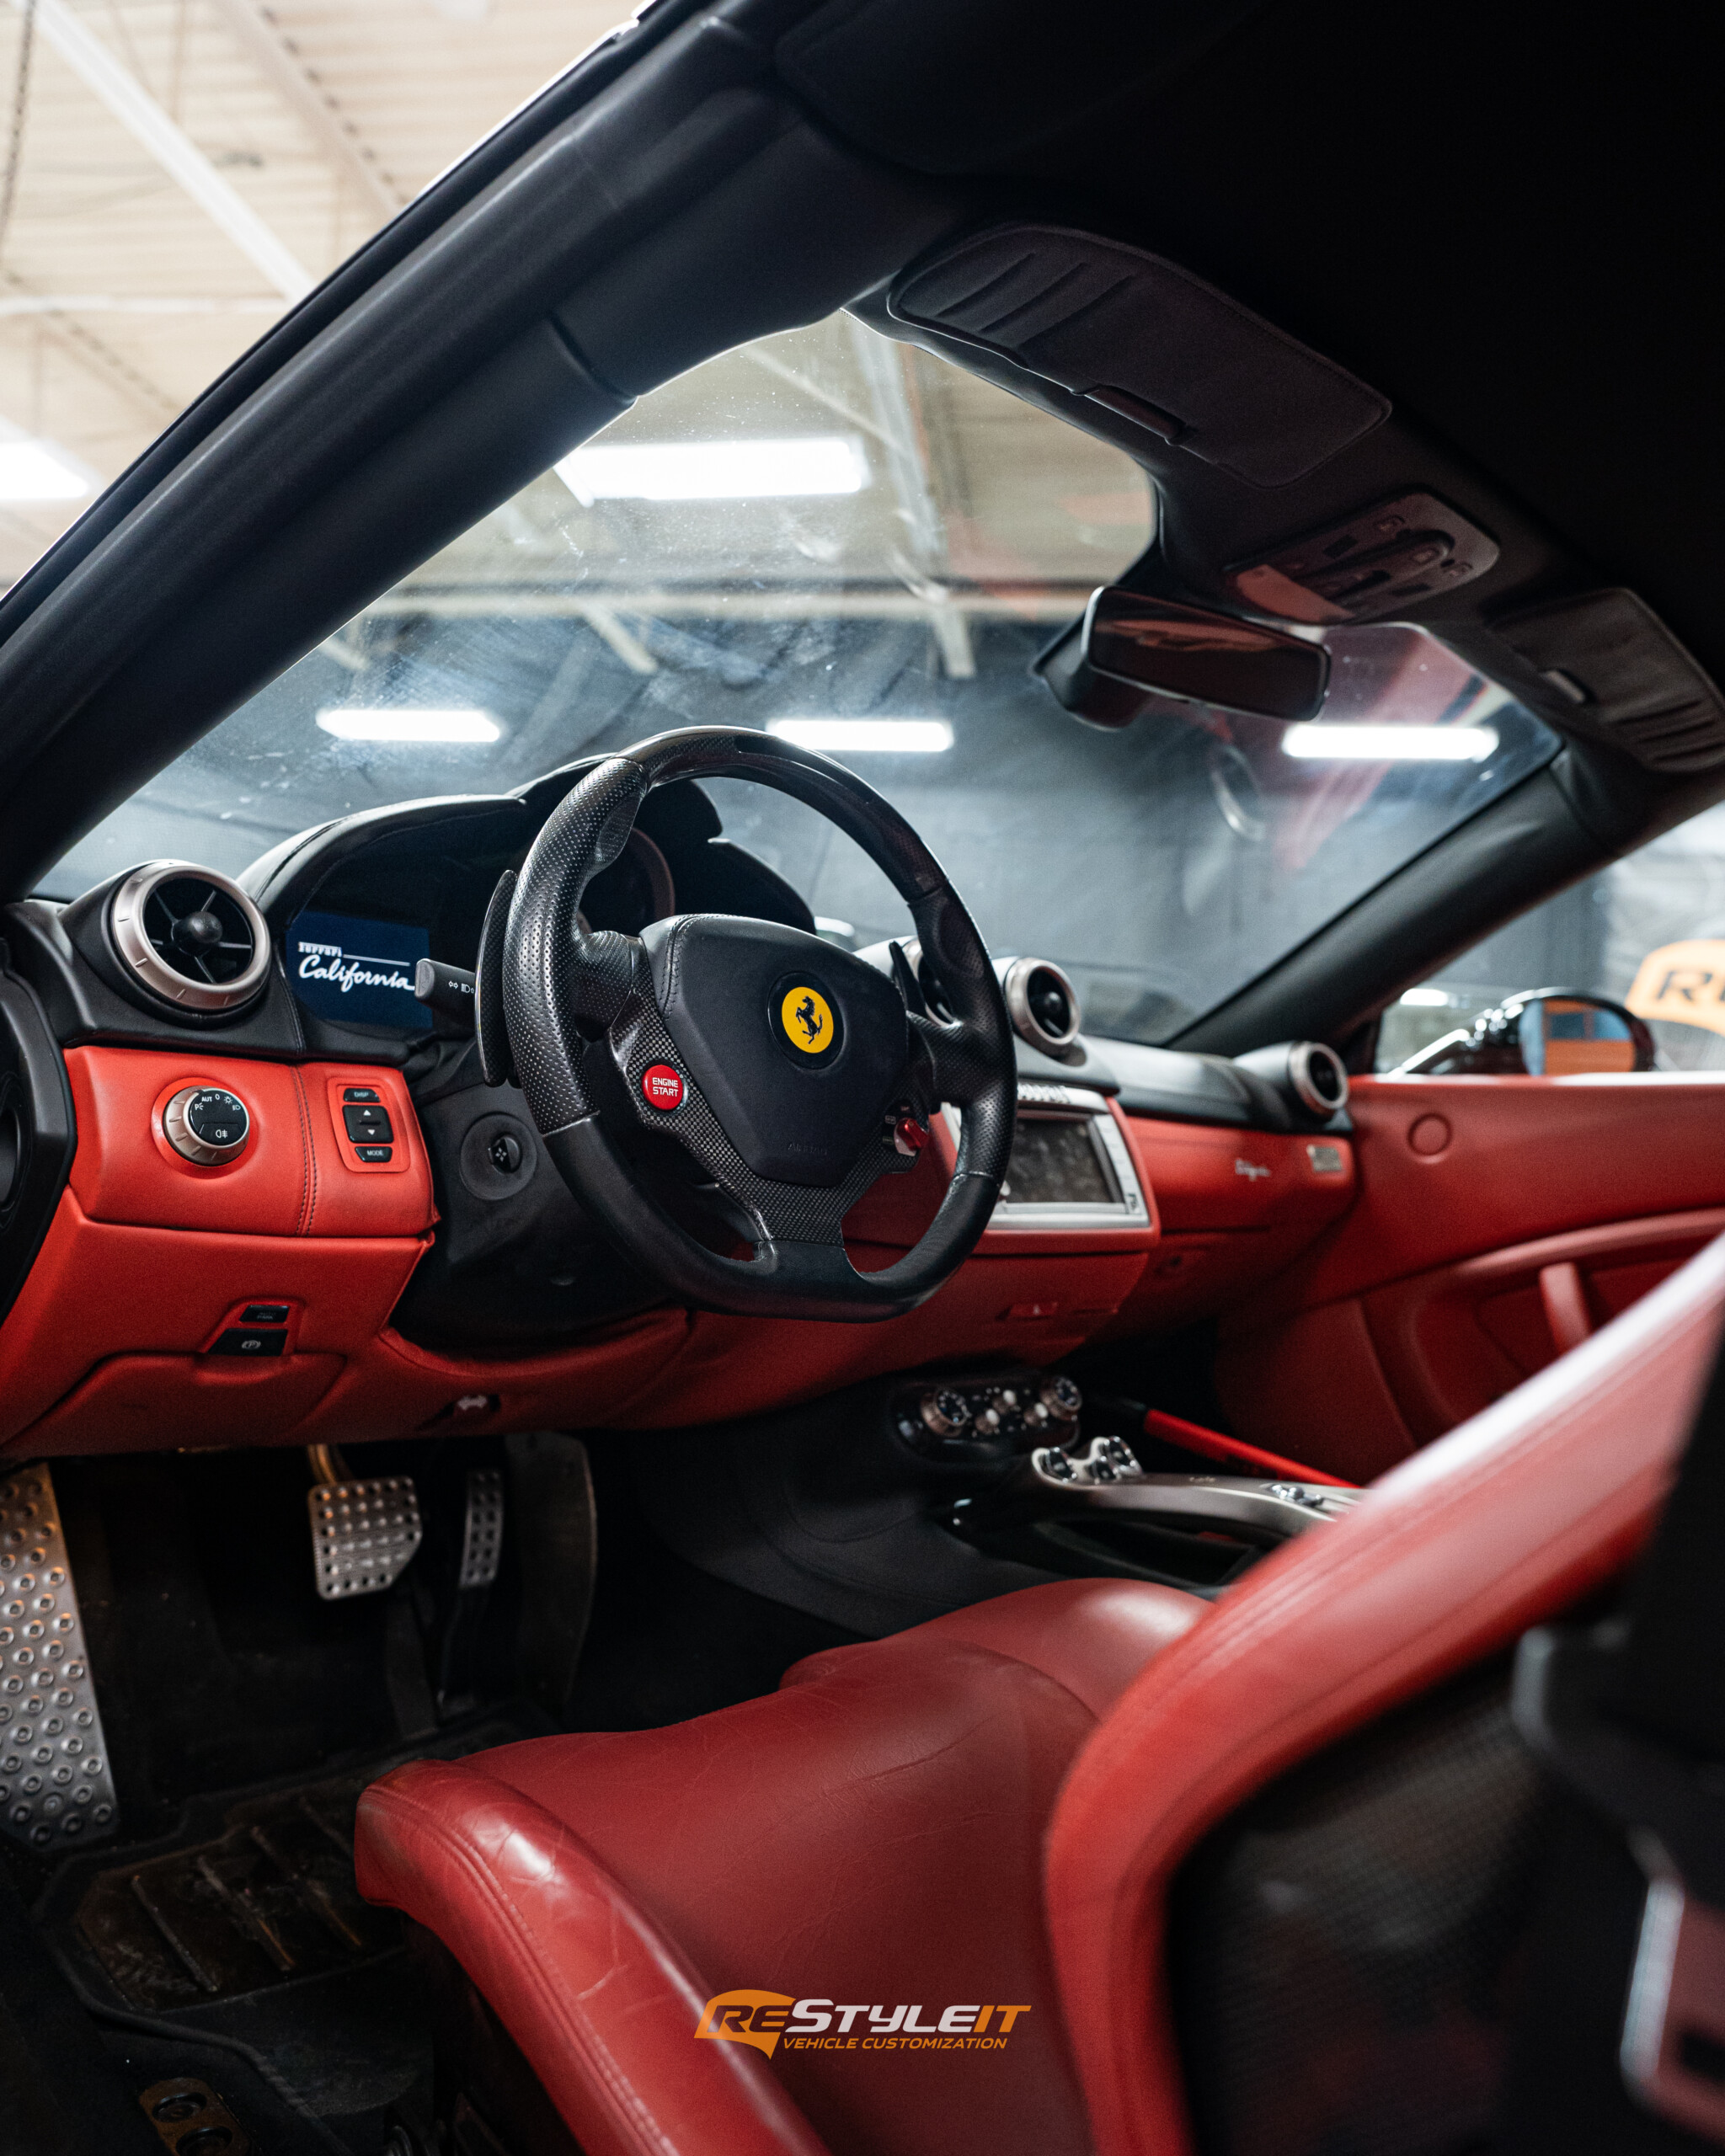 Revitalizing the Icon: A Jaw-Dropping Cherry Red Wrap for the Ferrari California